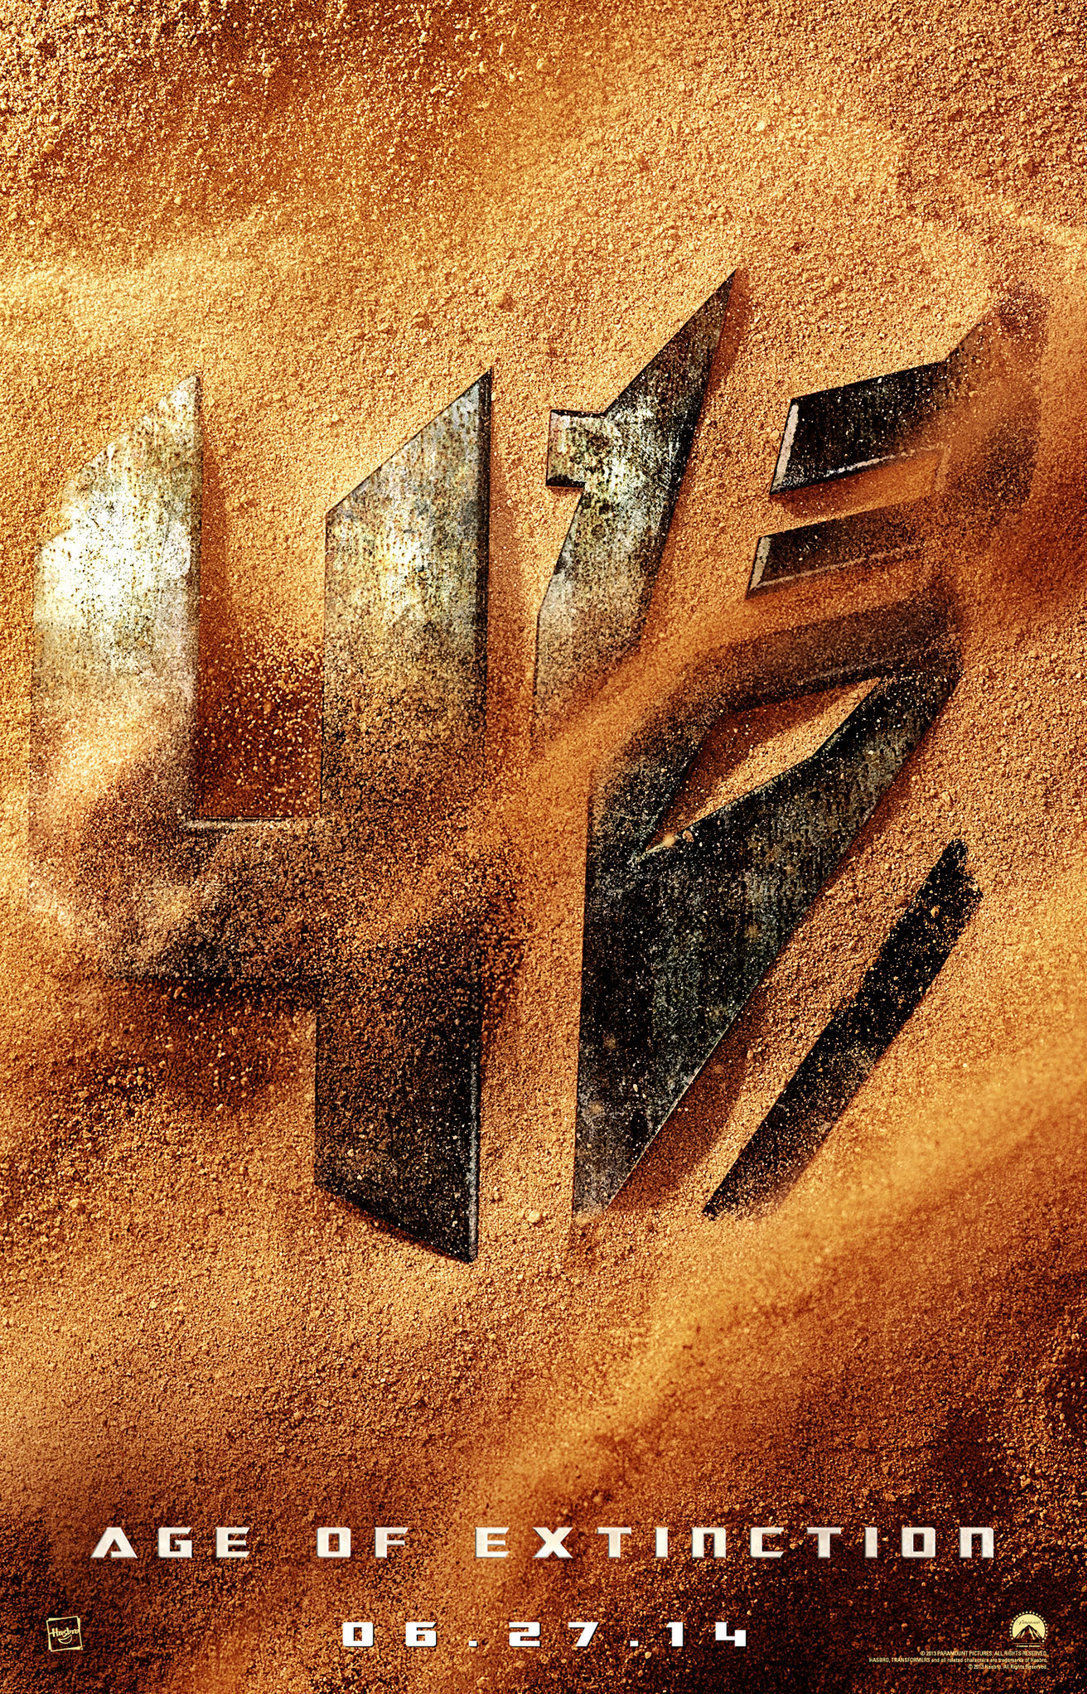 transformers 4 age of extinction poster